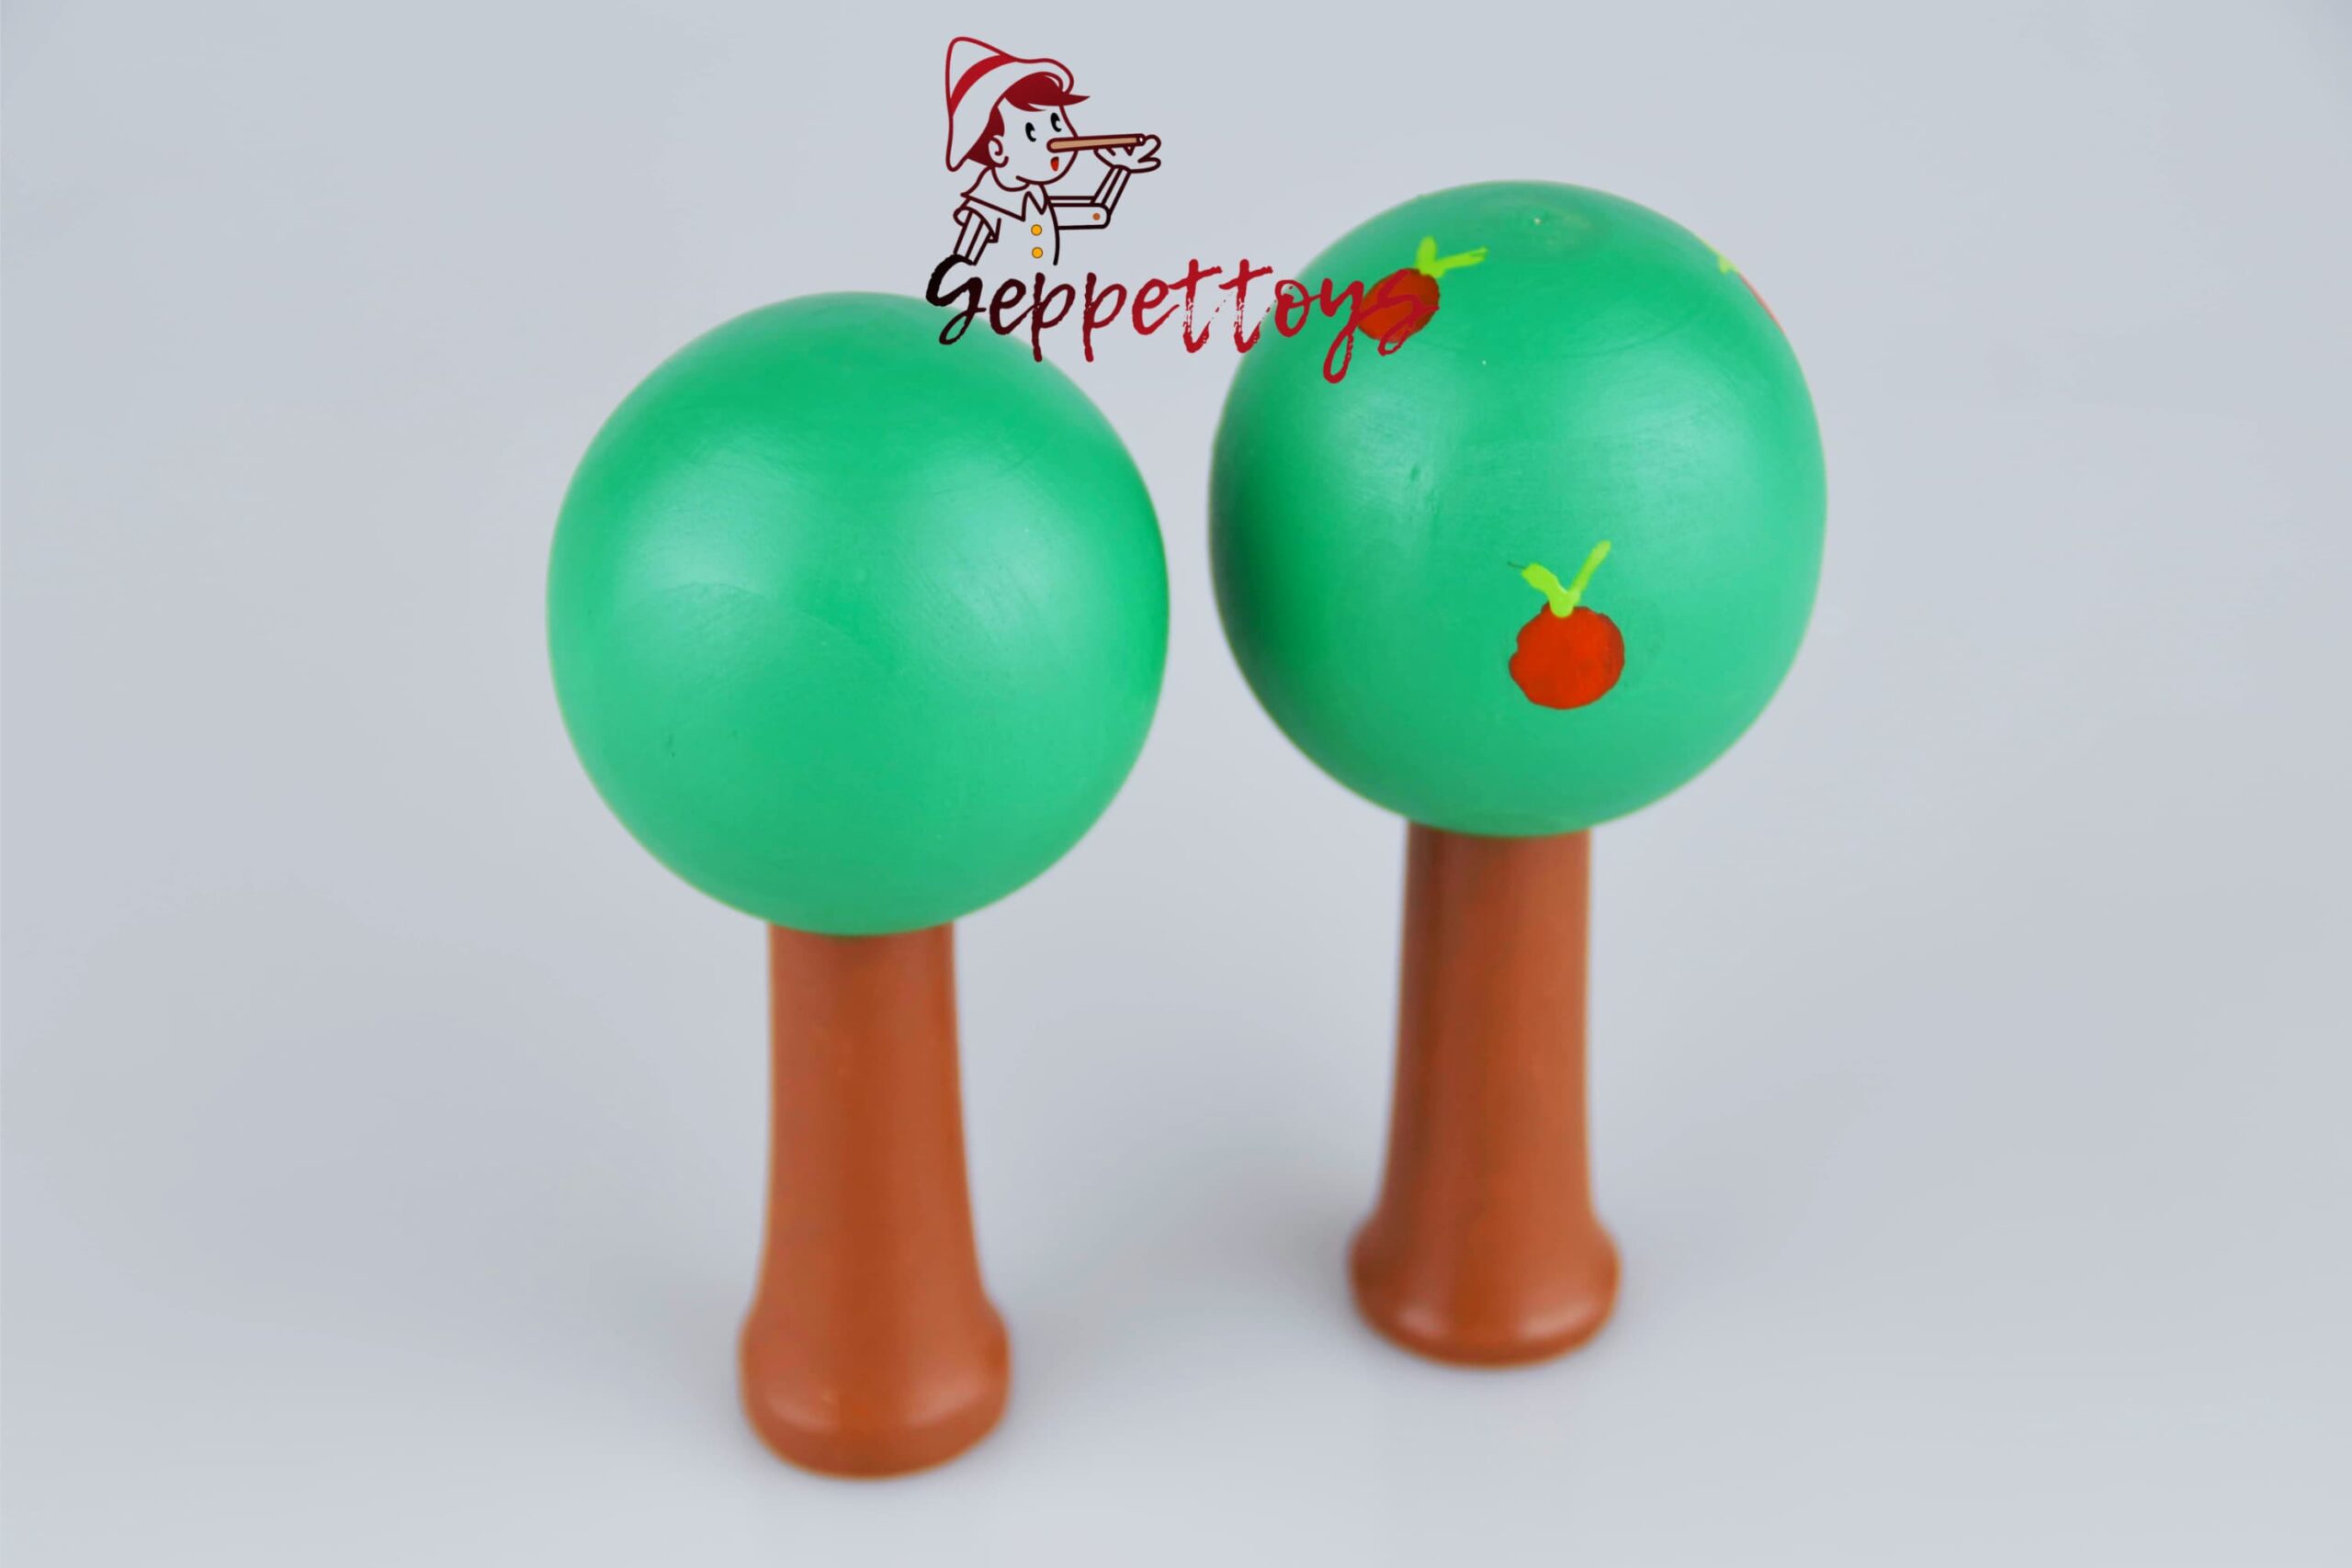 Geppettoys Waldorf Orman